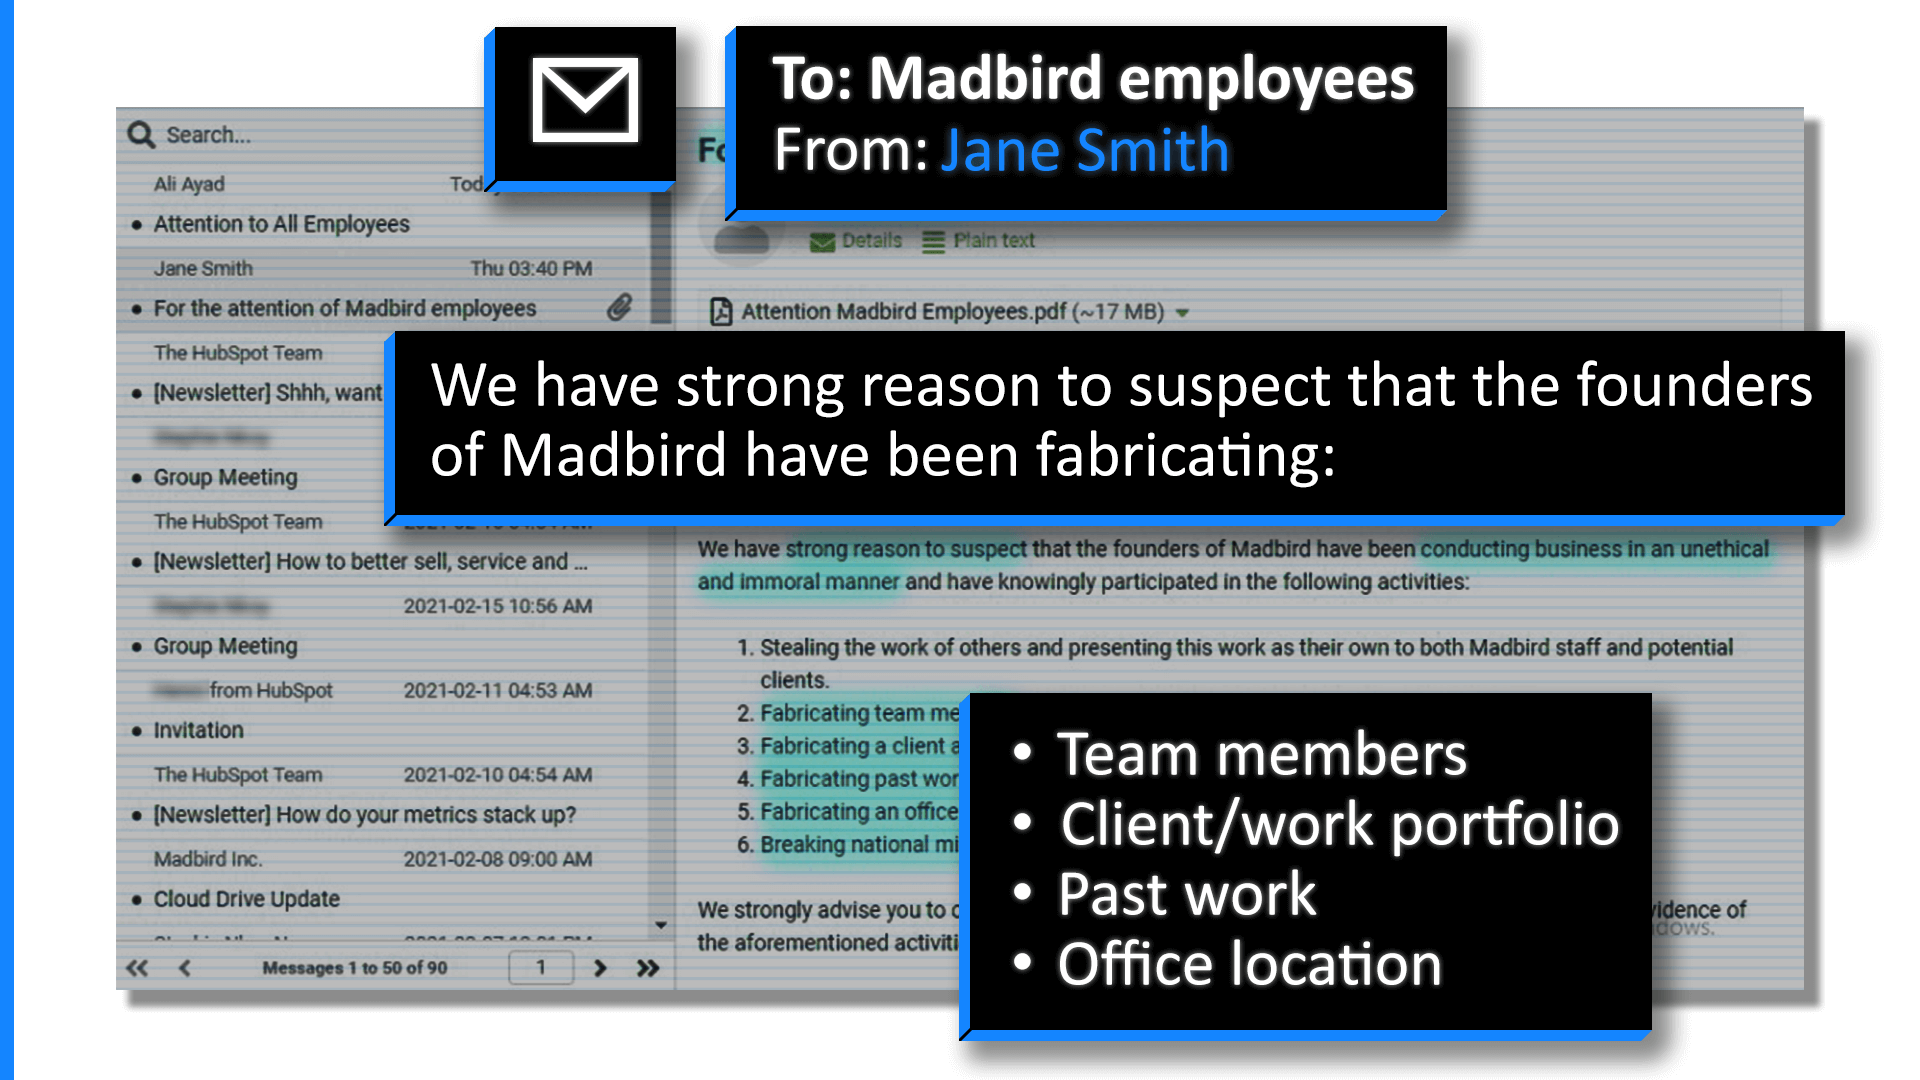 Details of the email from "Jane Smith" to all Madbird employees